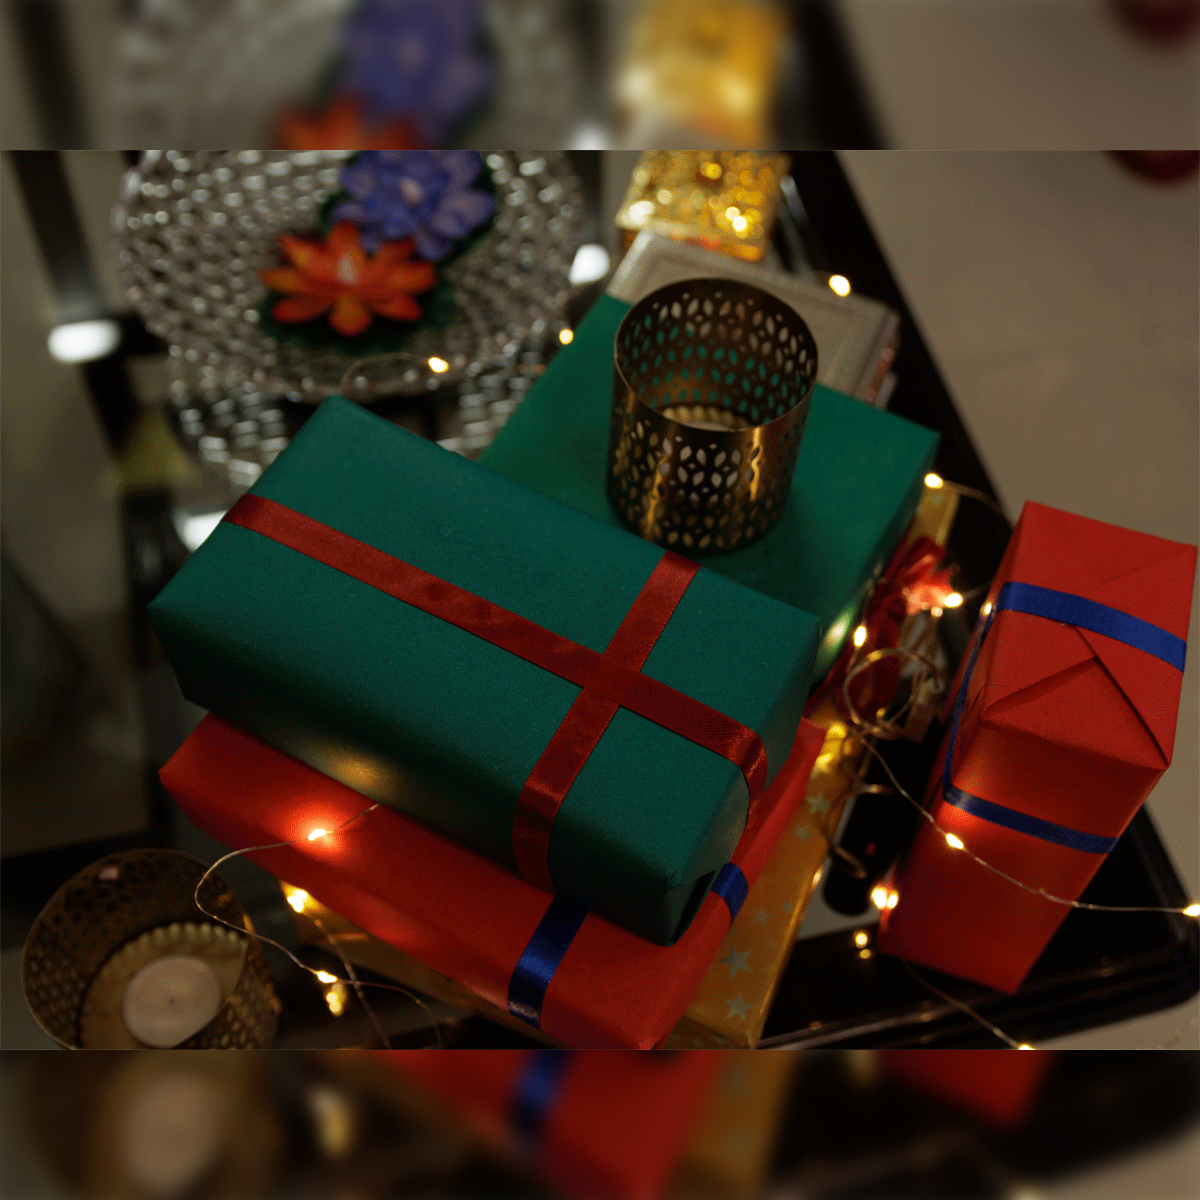 Corporate gift ideas for employees | LinkedIn